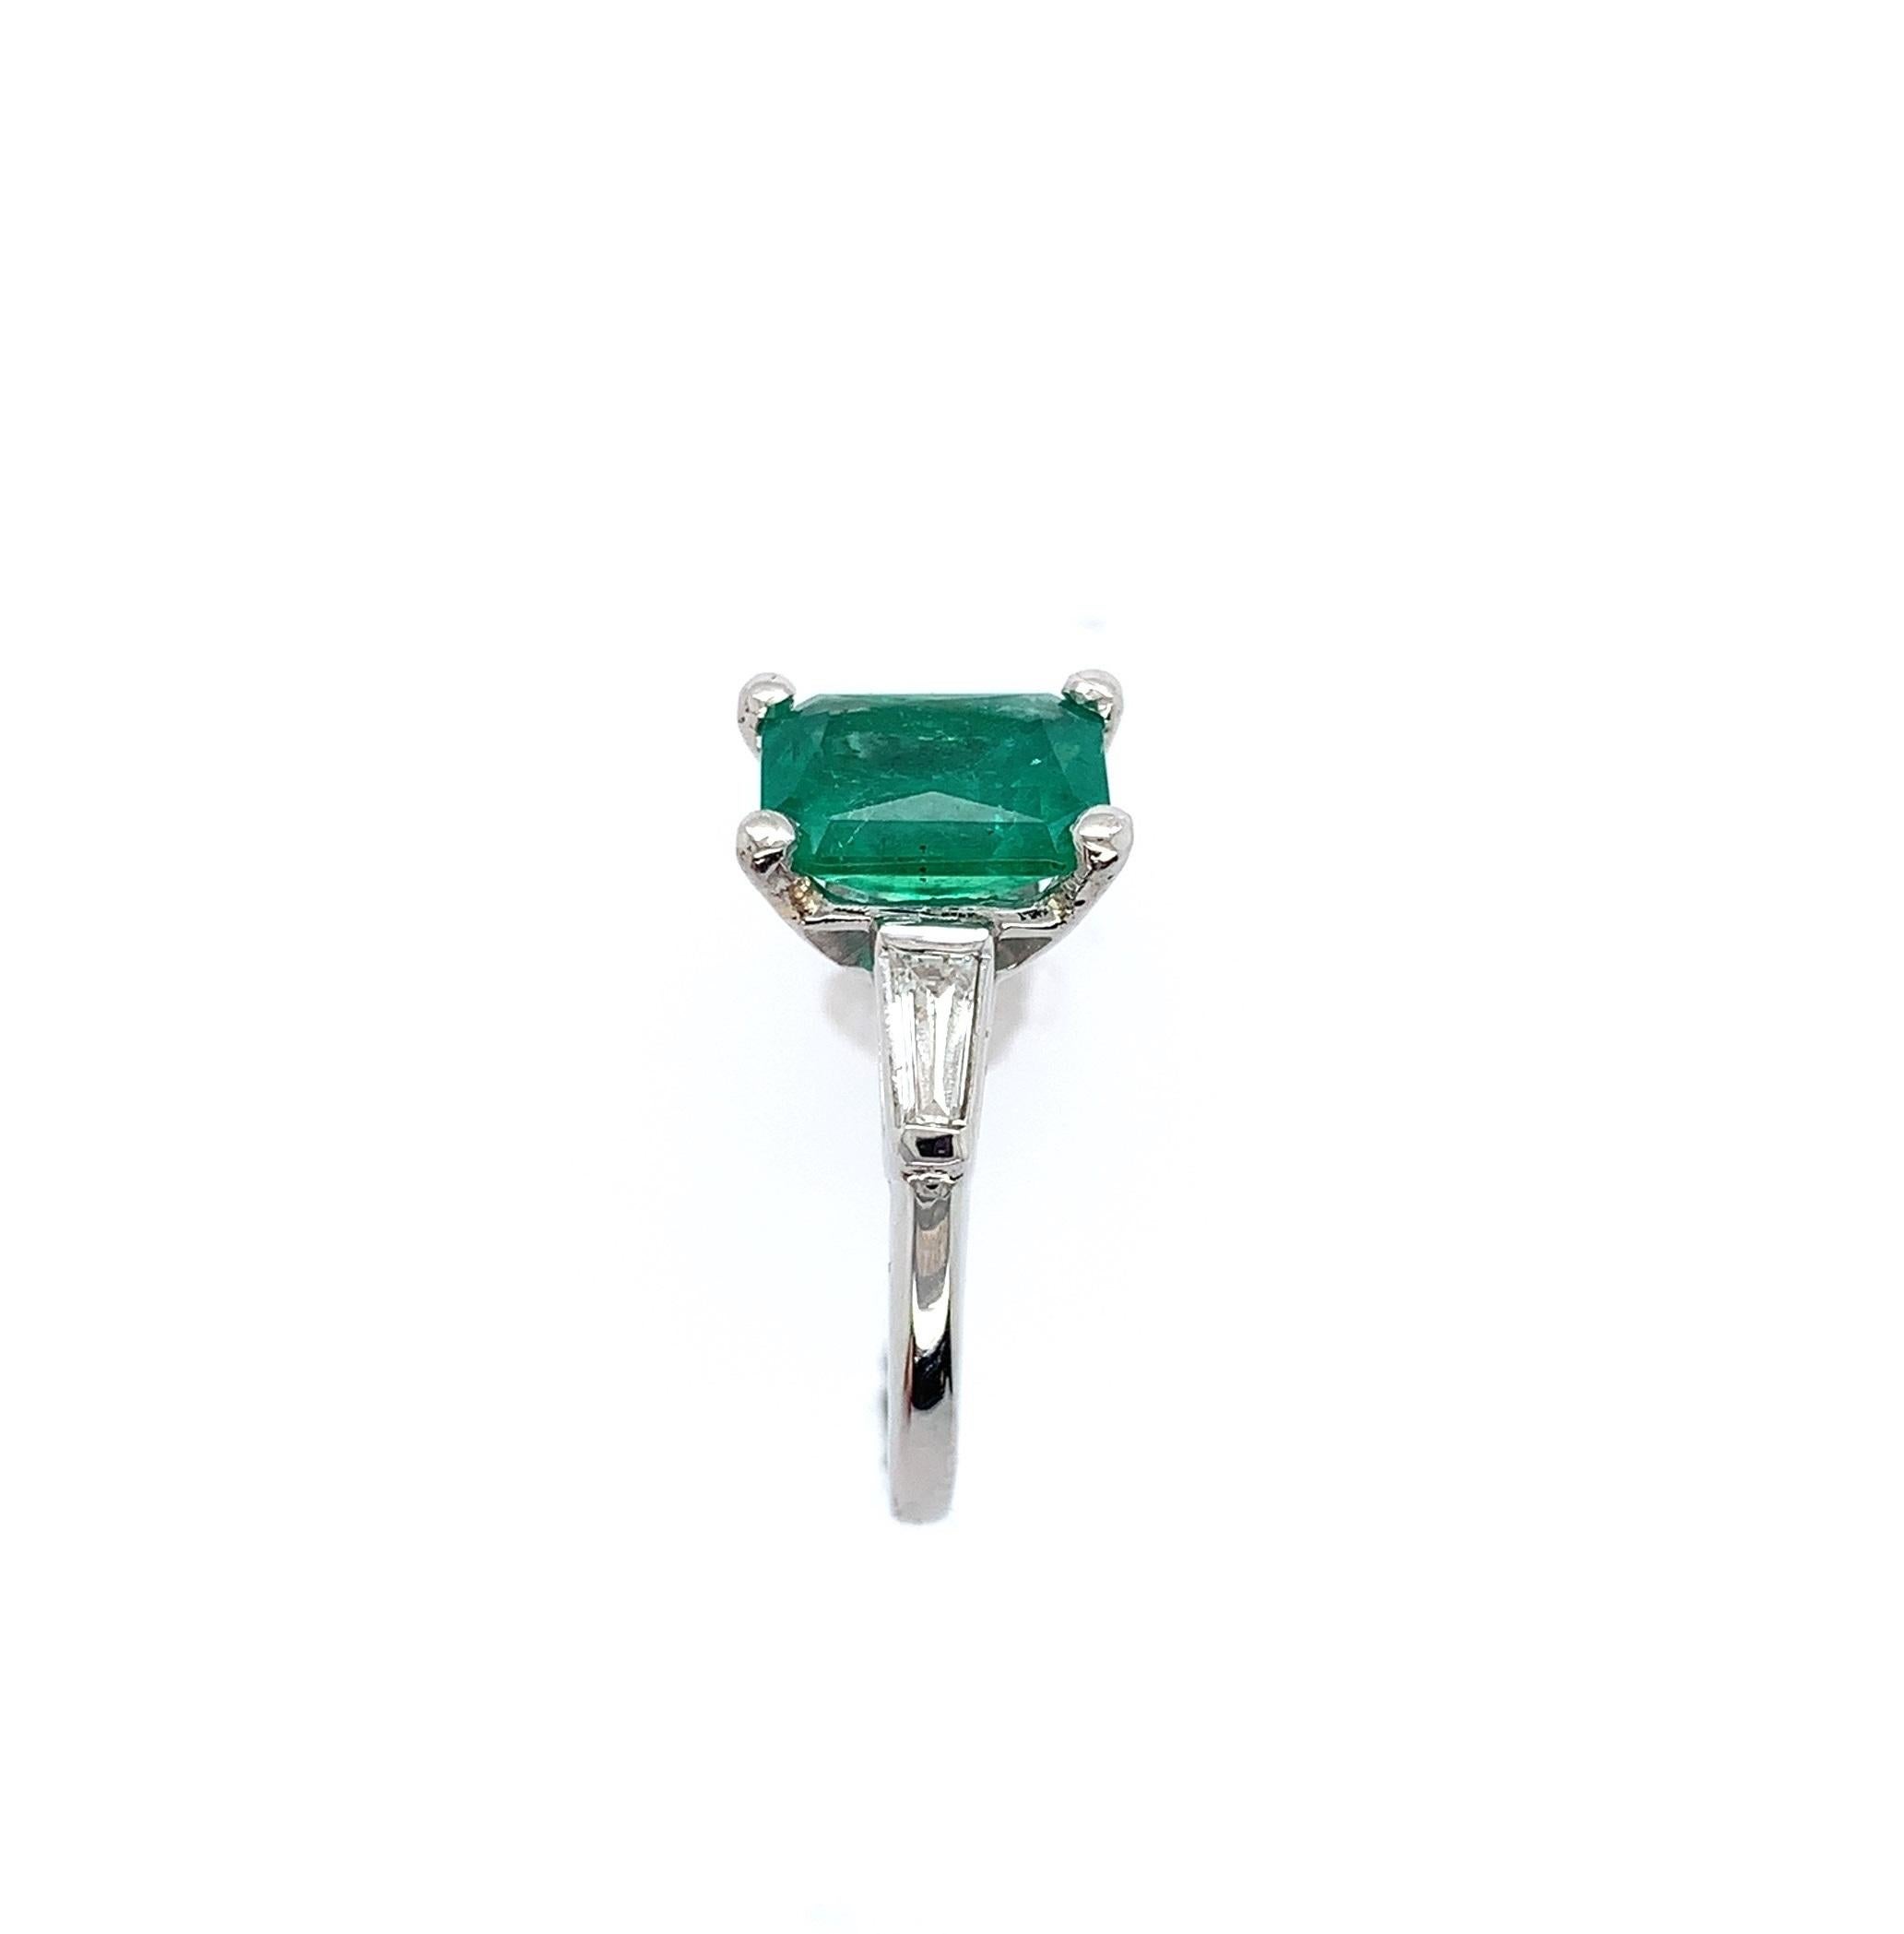 Platinum emerald and diamond ring featuring a genuine earth mined emerald weighing 1.87 carats with GIA report #5222332952. The report states it is an octagonal brilliant cut measuring 8.58mm x 6.63mm x5.24mm. The emerald has bright grass green